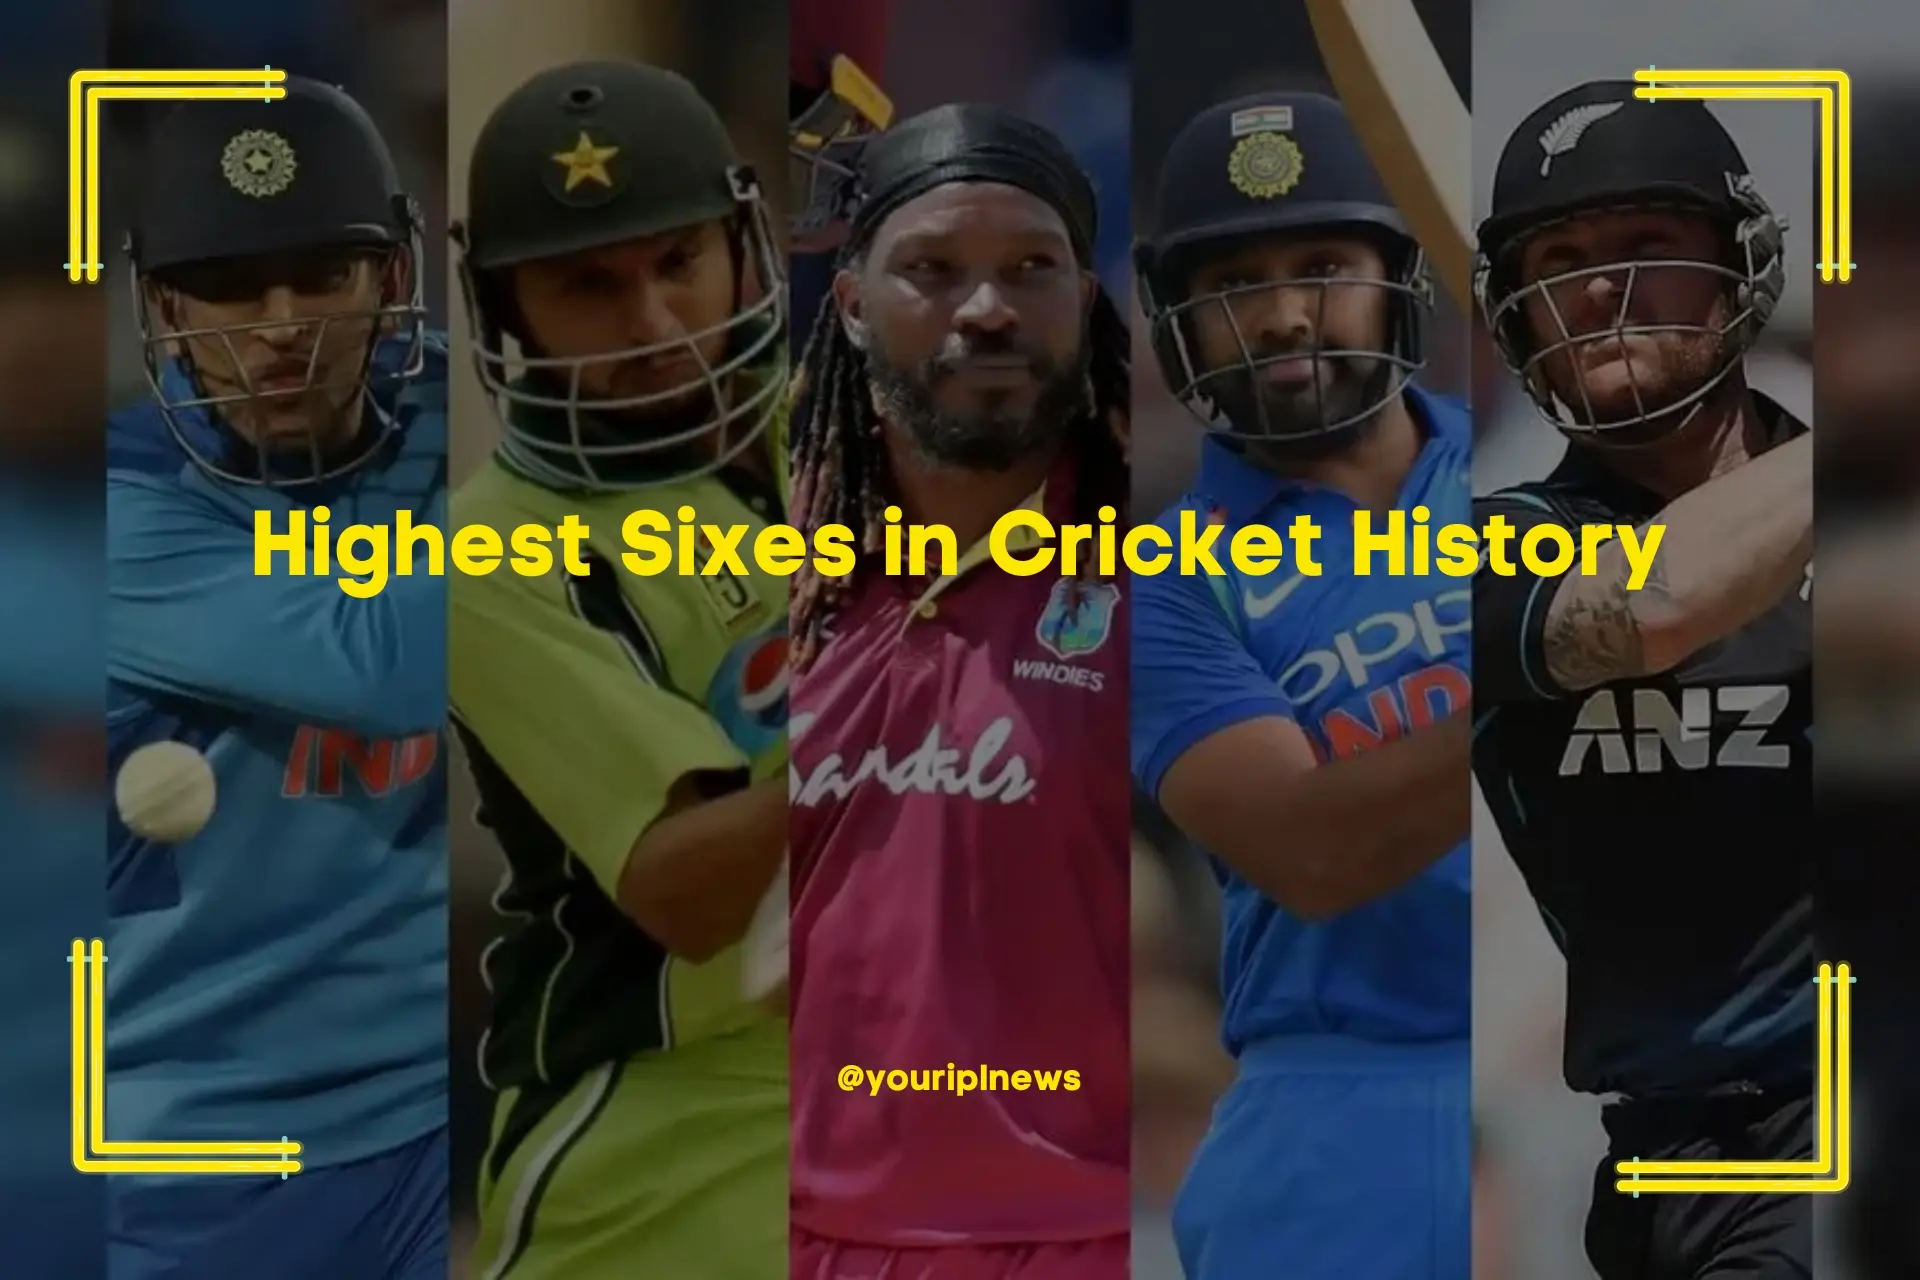 Highest Sixes in Cricket History